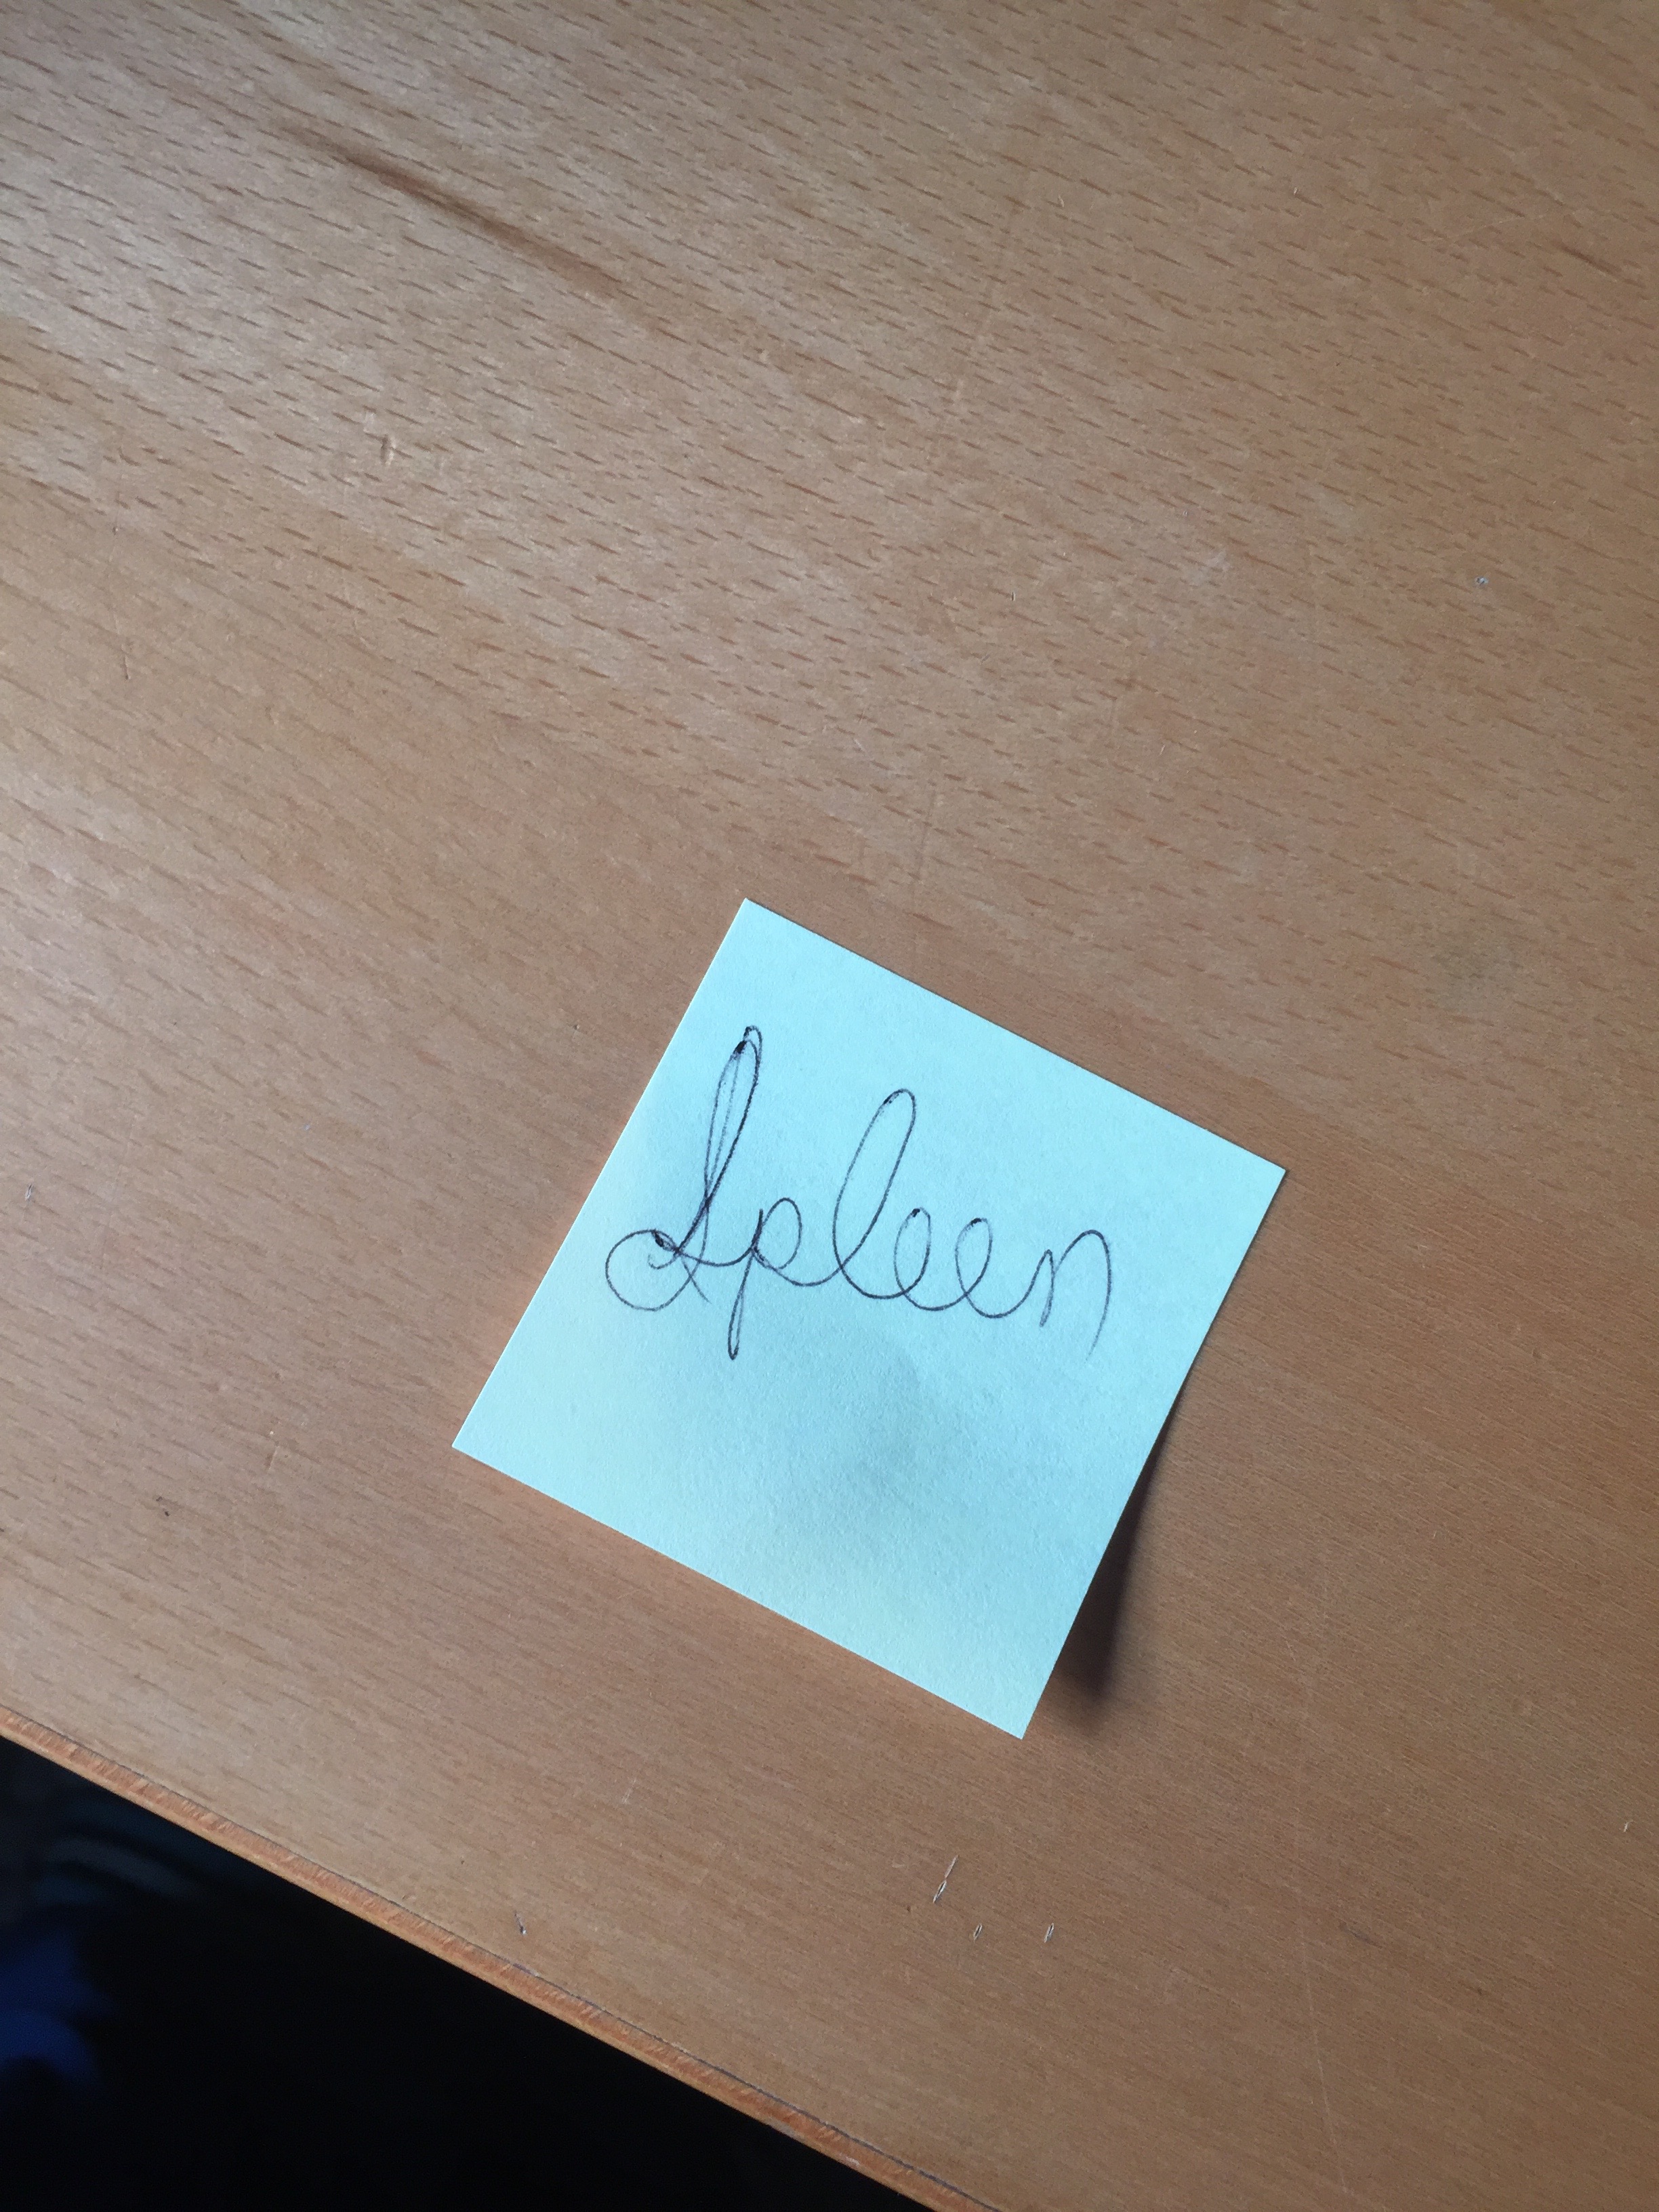 Photo of a Post-It note with the word “Spleen” written on it